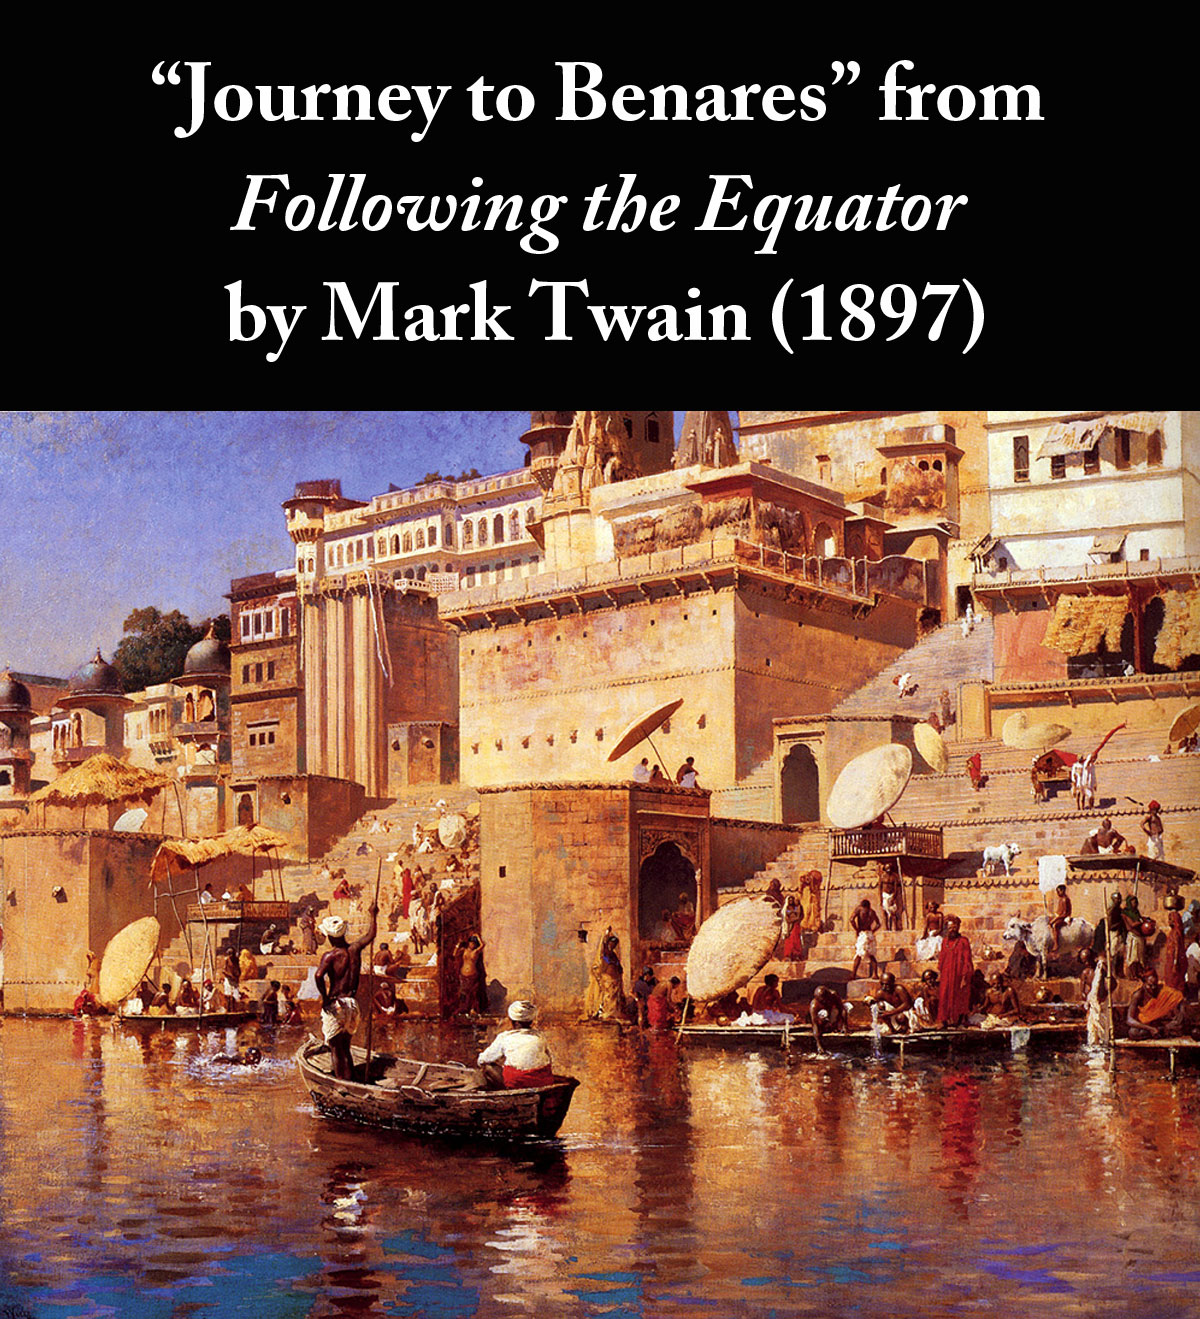 Journey to Benares from Following the Equator (1897)